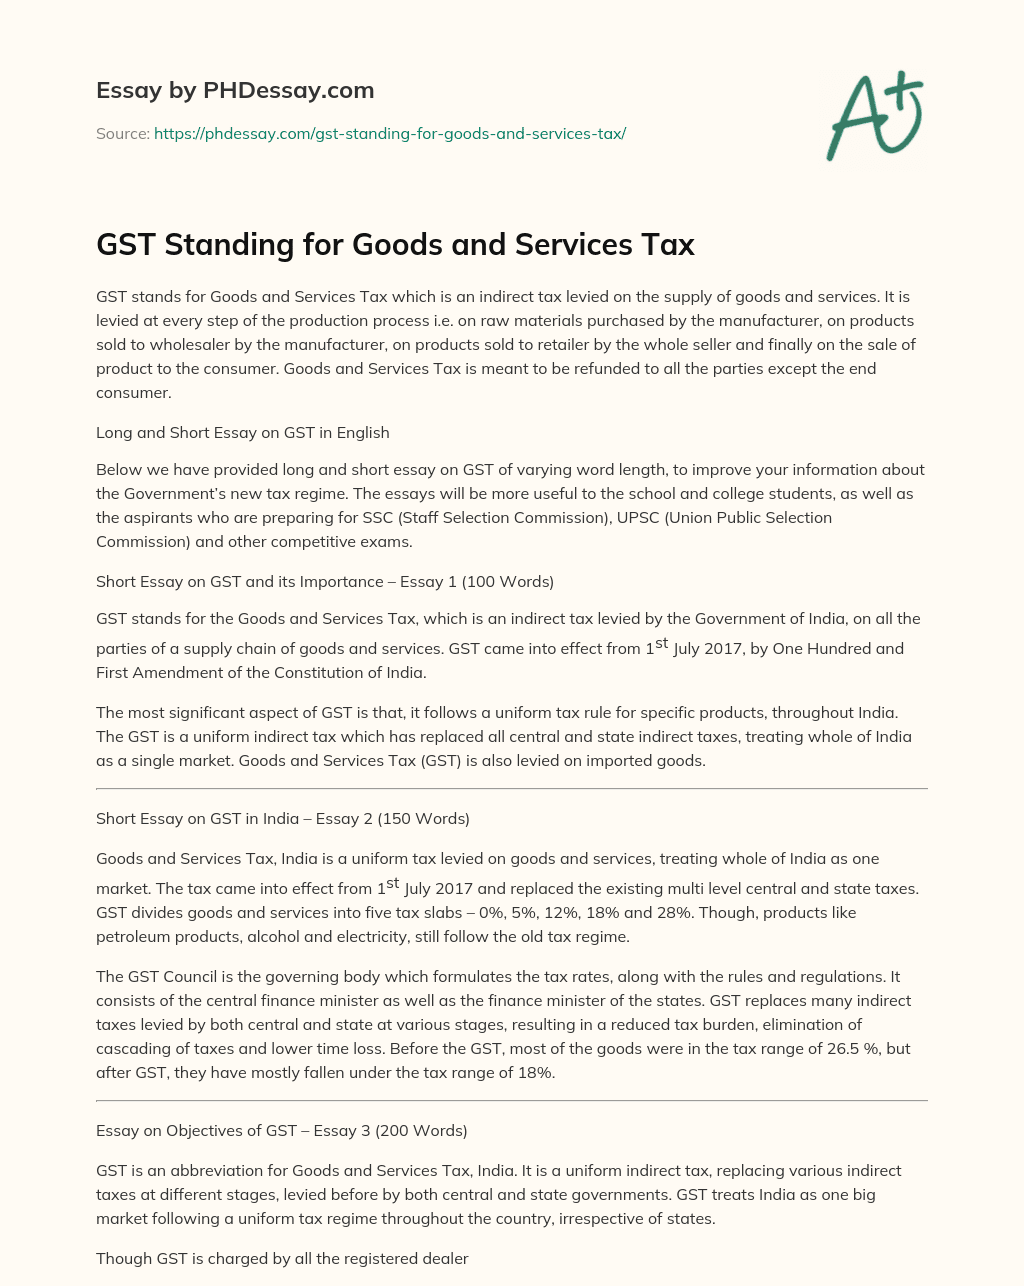 essay on goods and services tax